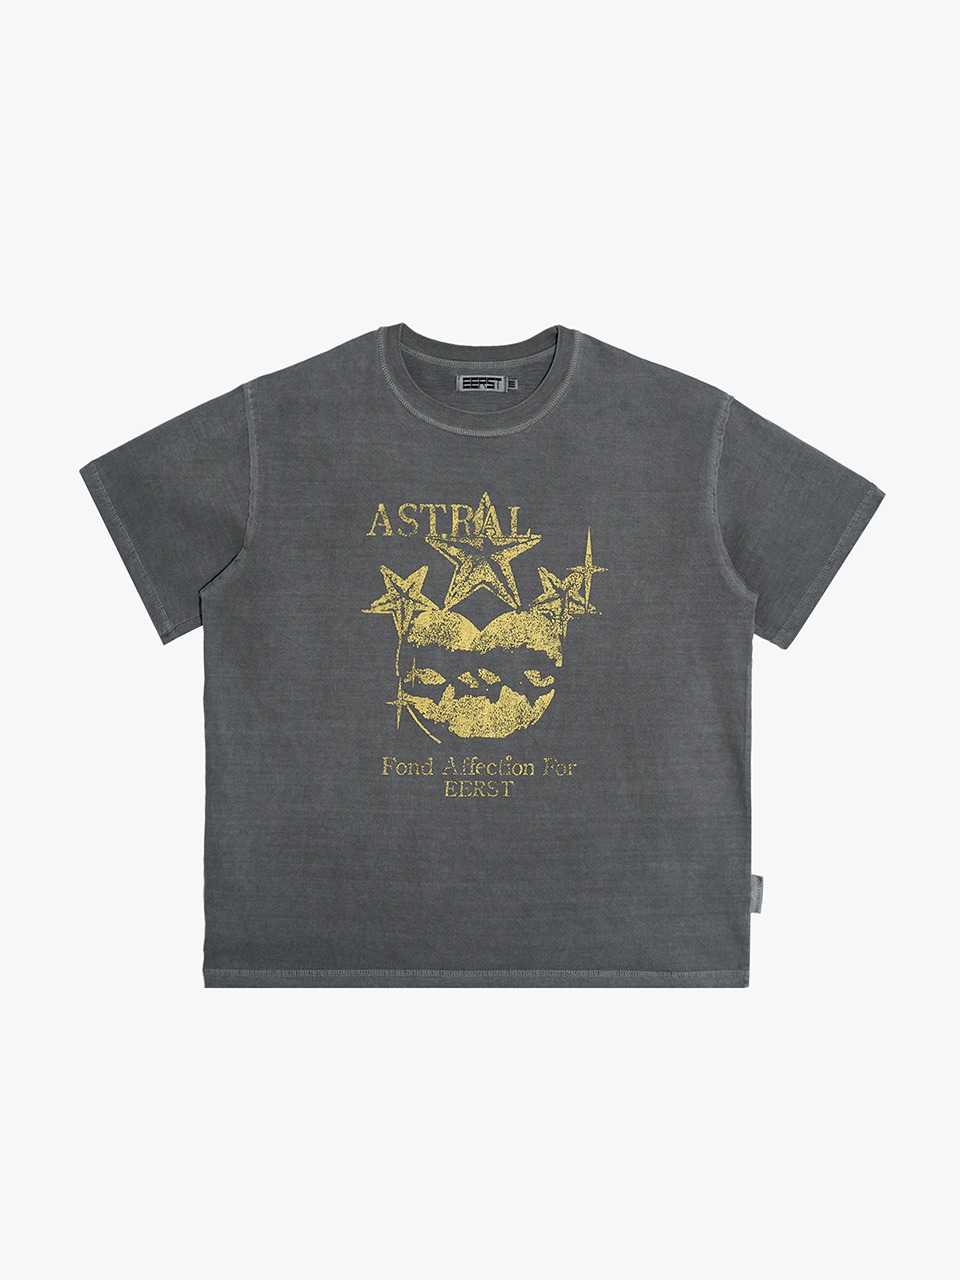 EERST - ASTRAL T-SHIRT (WASHED CHARCOAL)